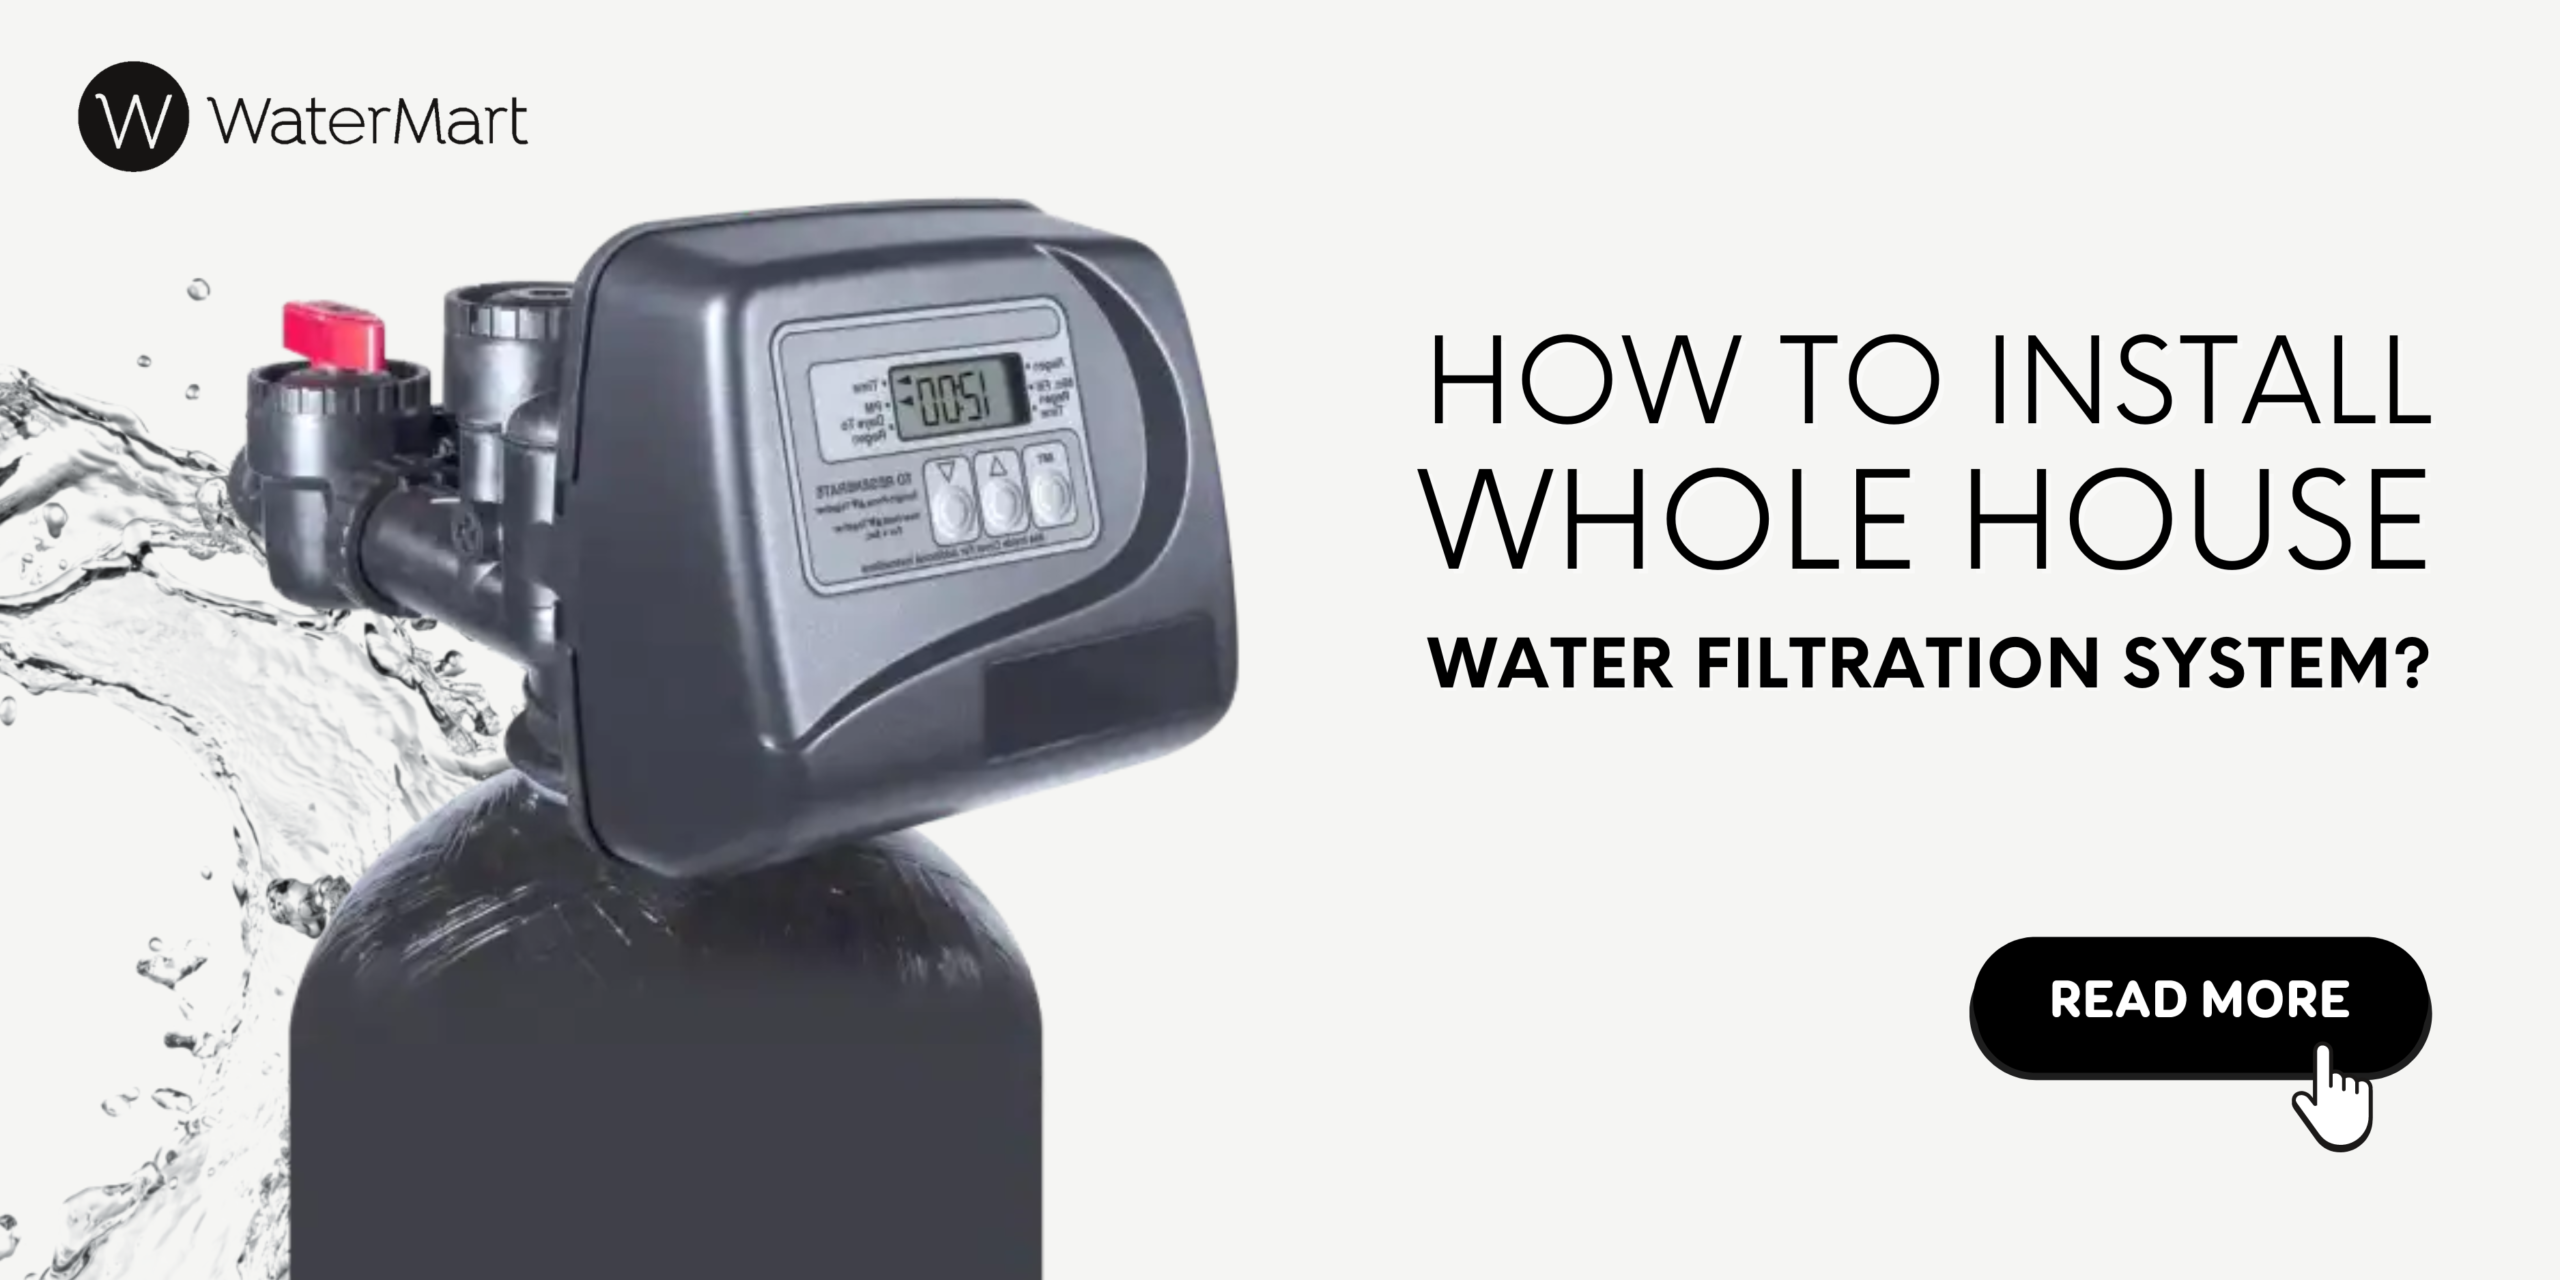 How To Install Whole House Water Filtration System